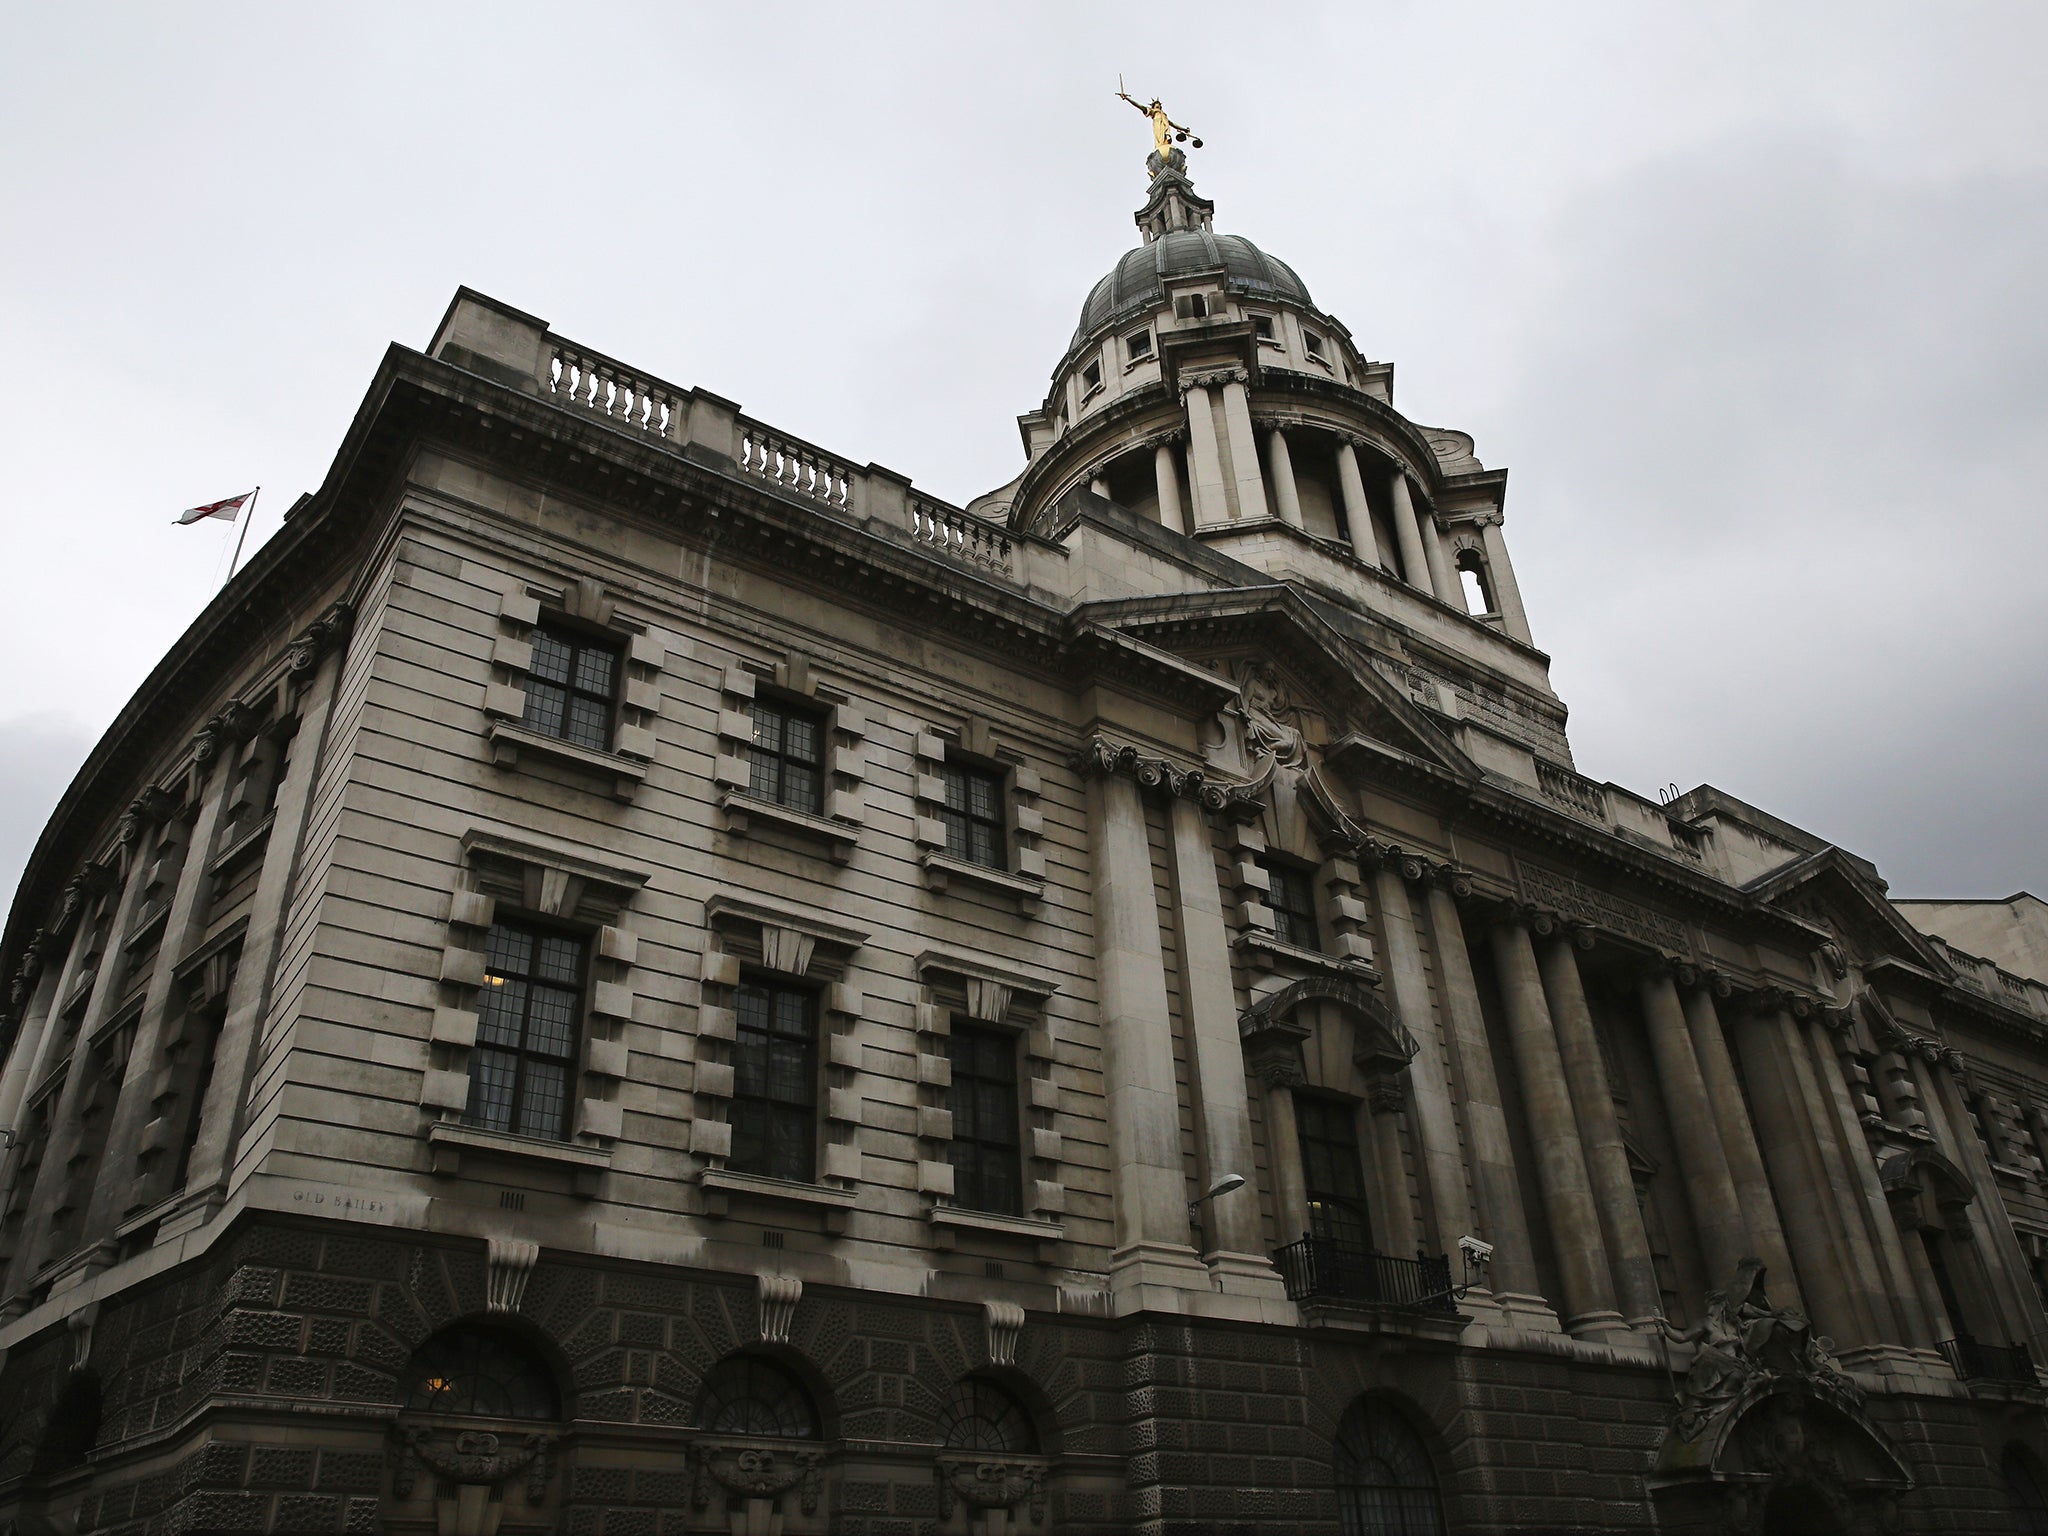 The case is being heard at the Old Bailey